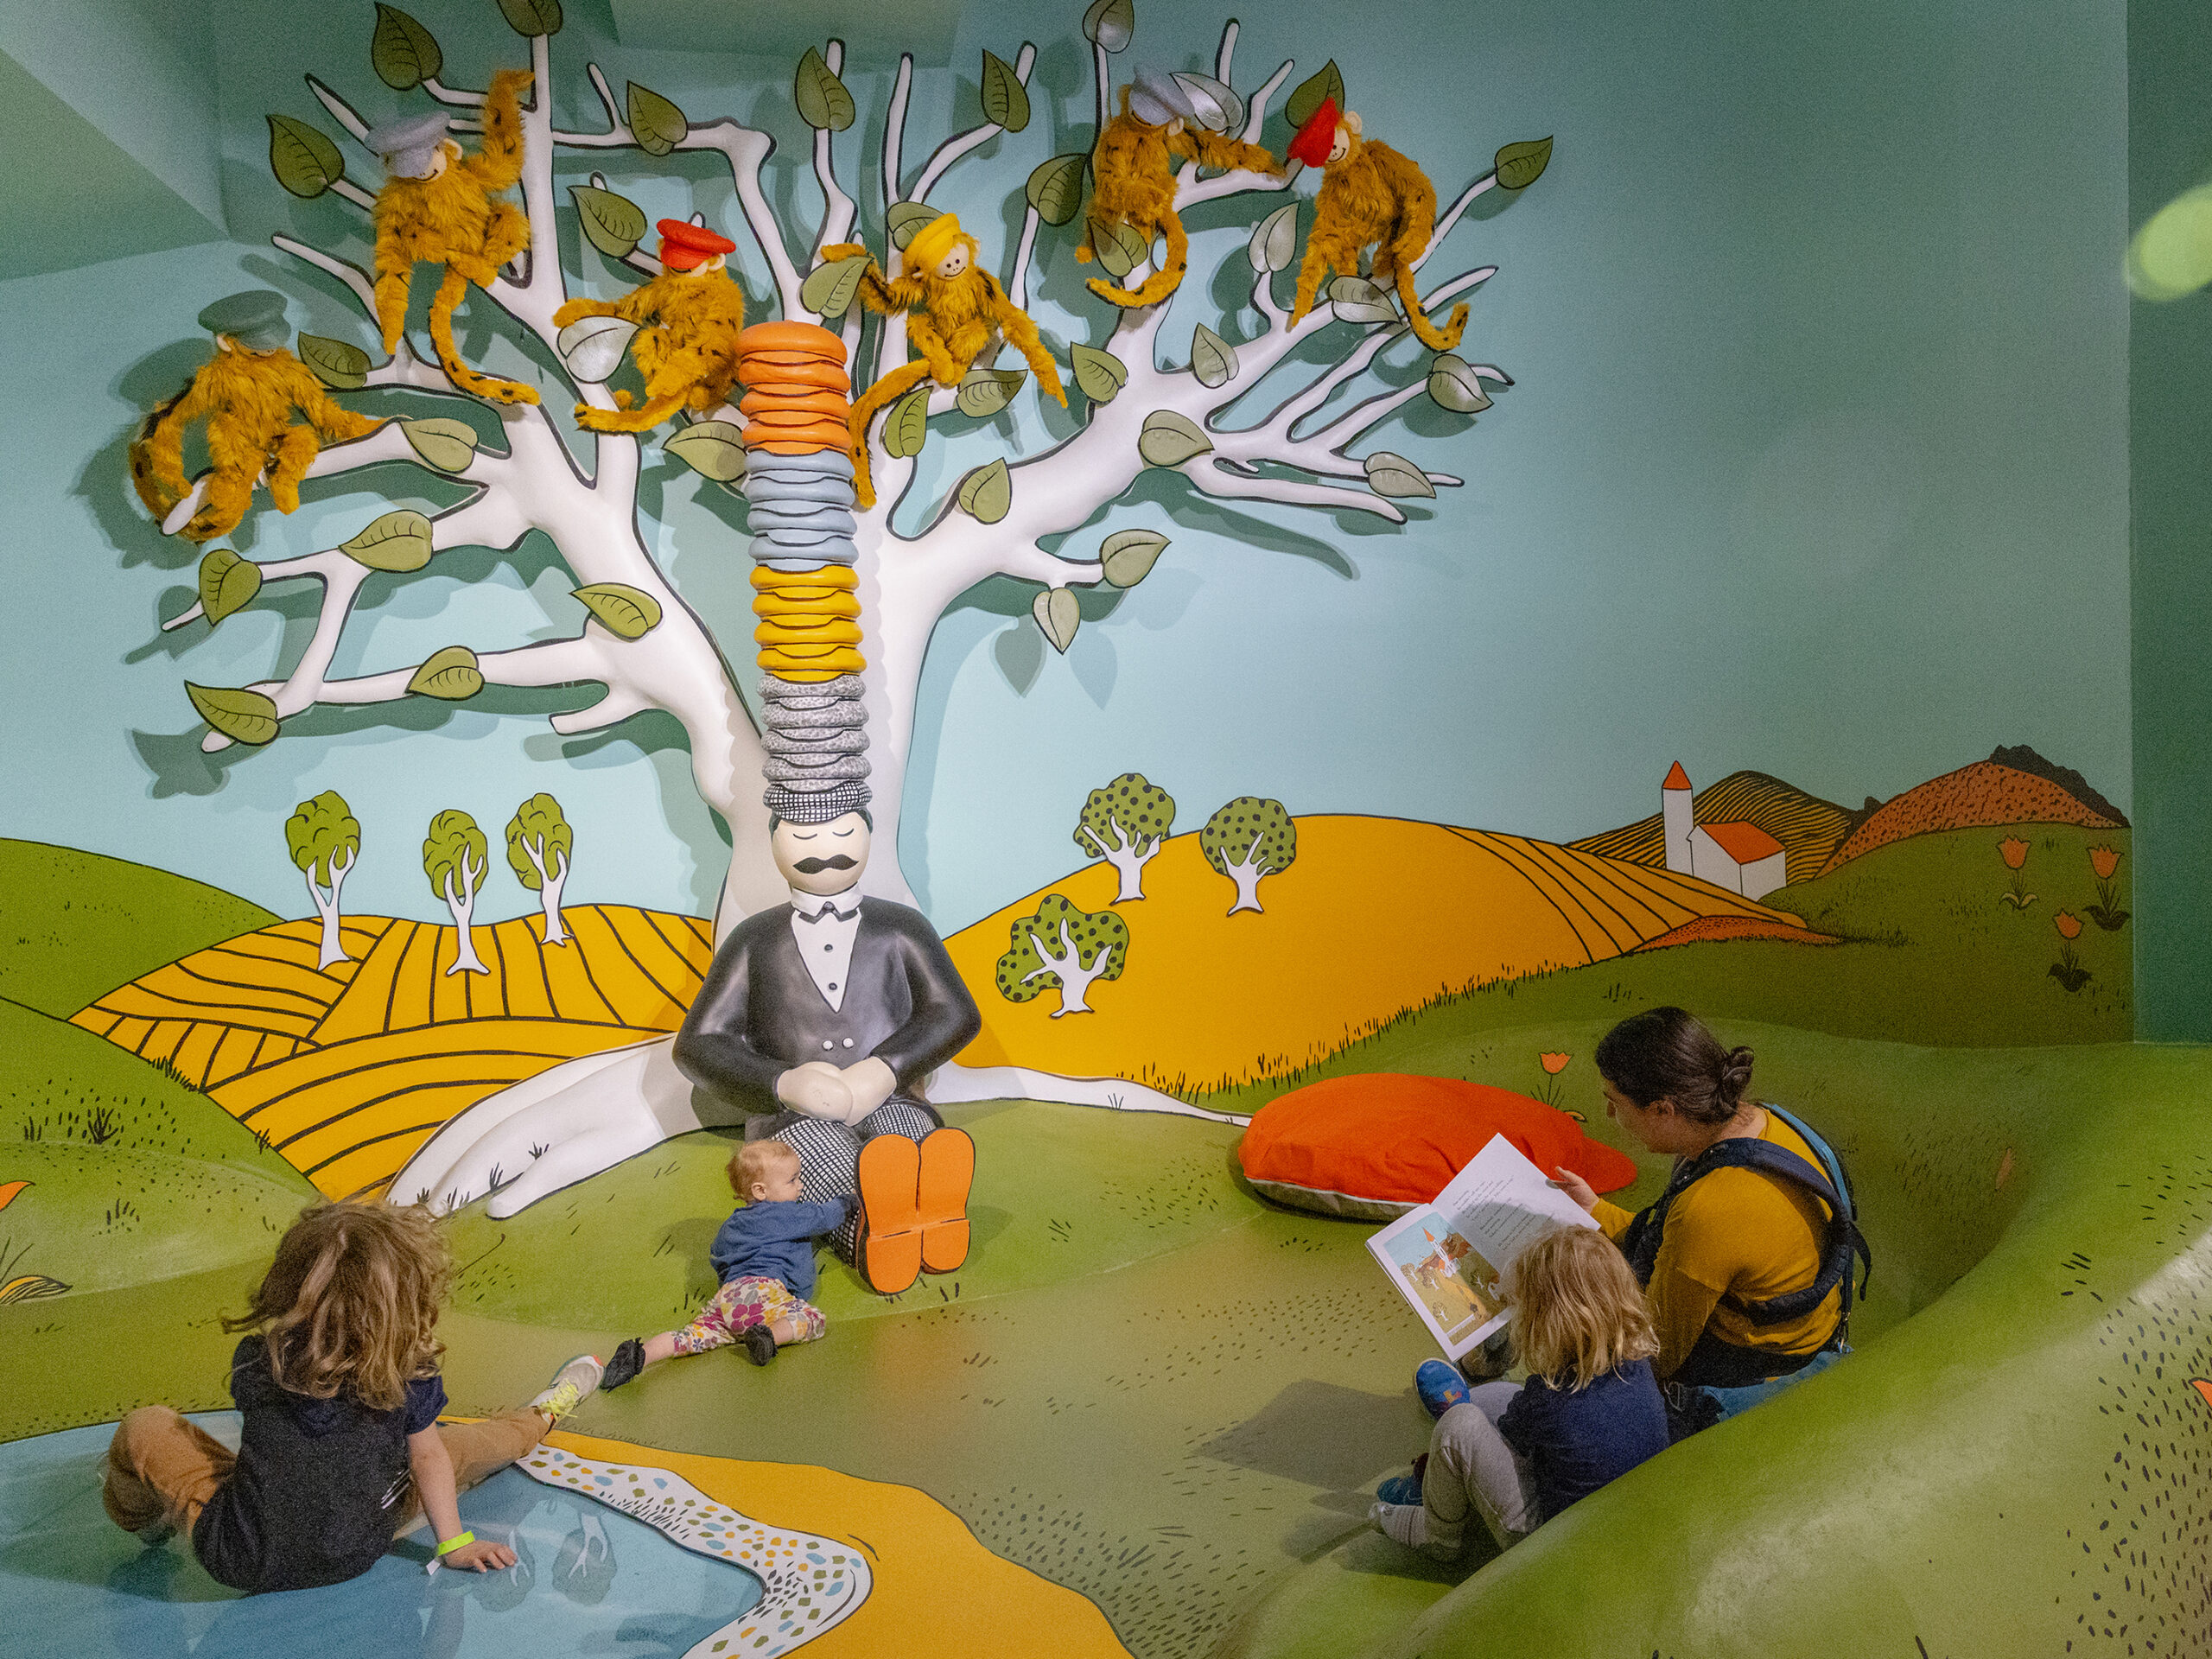 Lindsey Anderson sits down to read Caps for Sale by Esphyr Slobodkina to her children Orion, 6, Arthur, 4, and Thora Hoke, 1, inside the exhibit inspired by the book inside The Rabbit hOle, an immersive museum dedicated to children's literature, in North Kansas City, Mo.